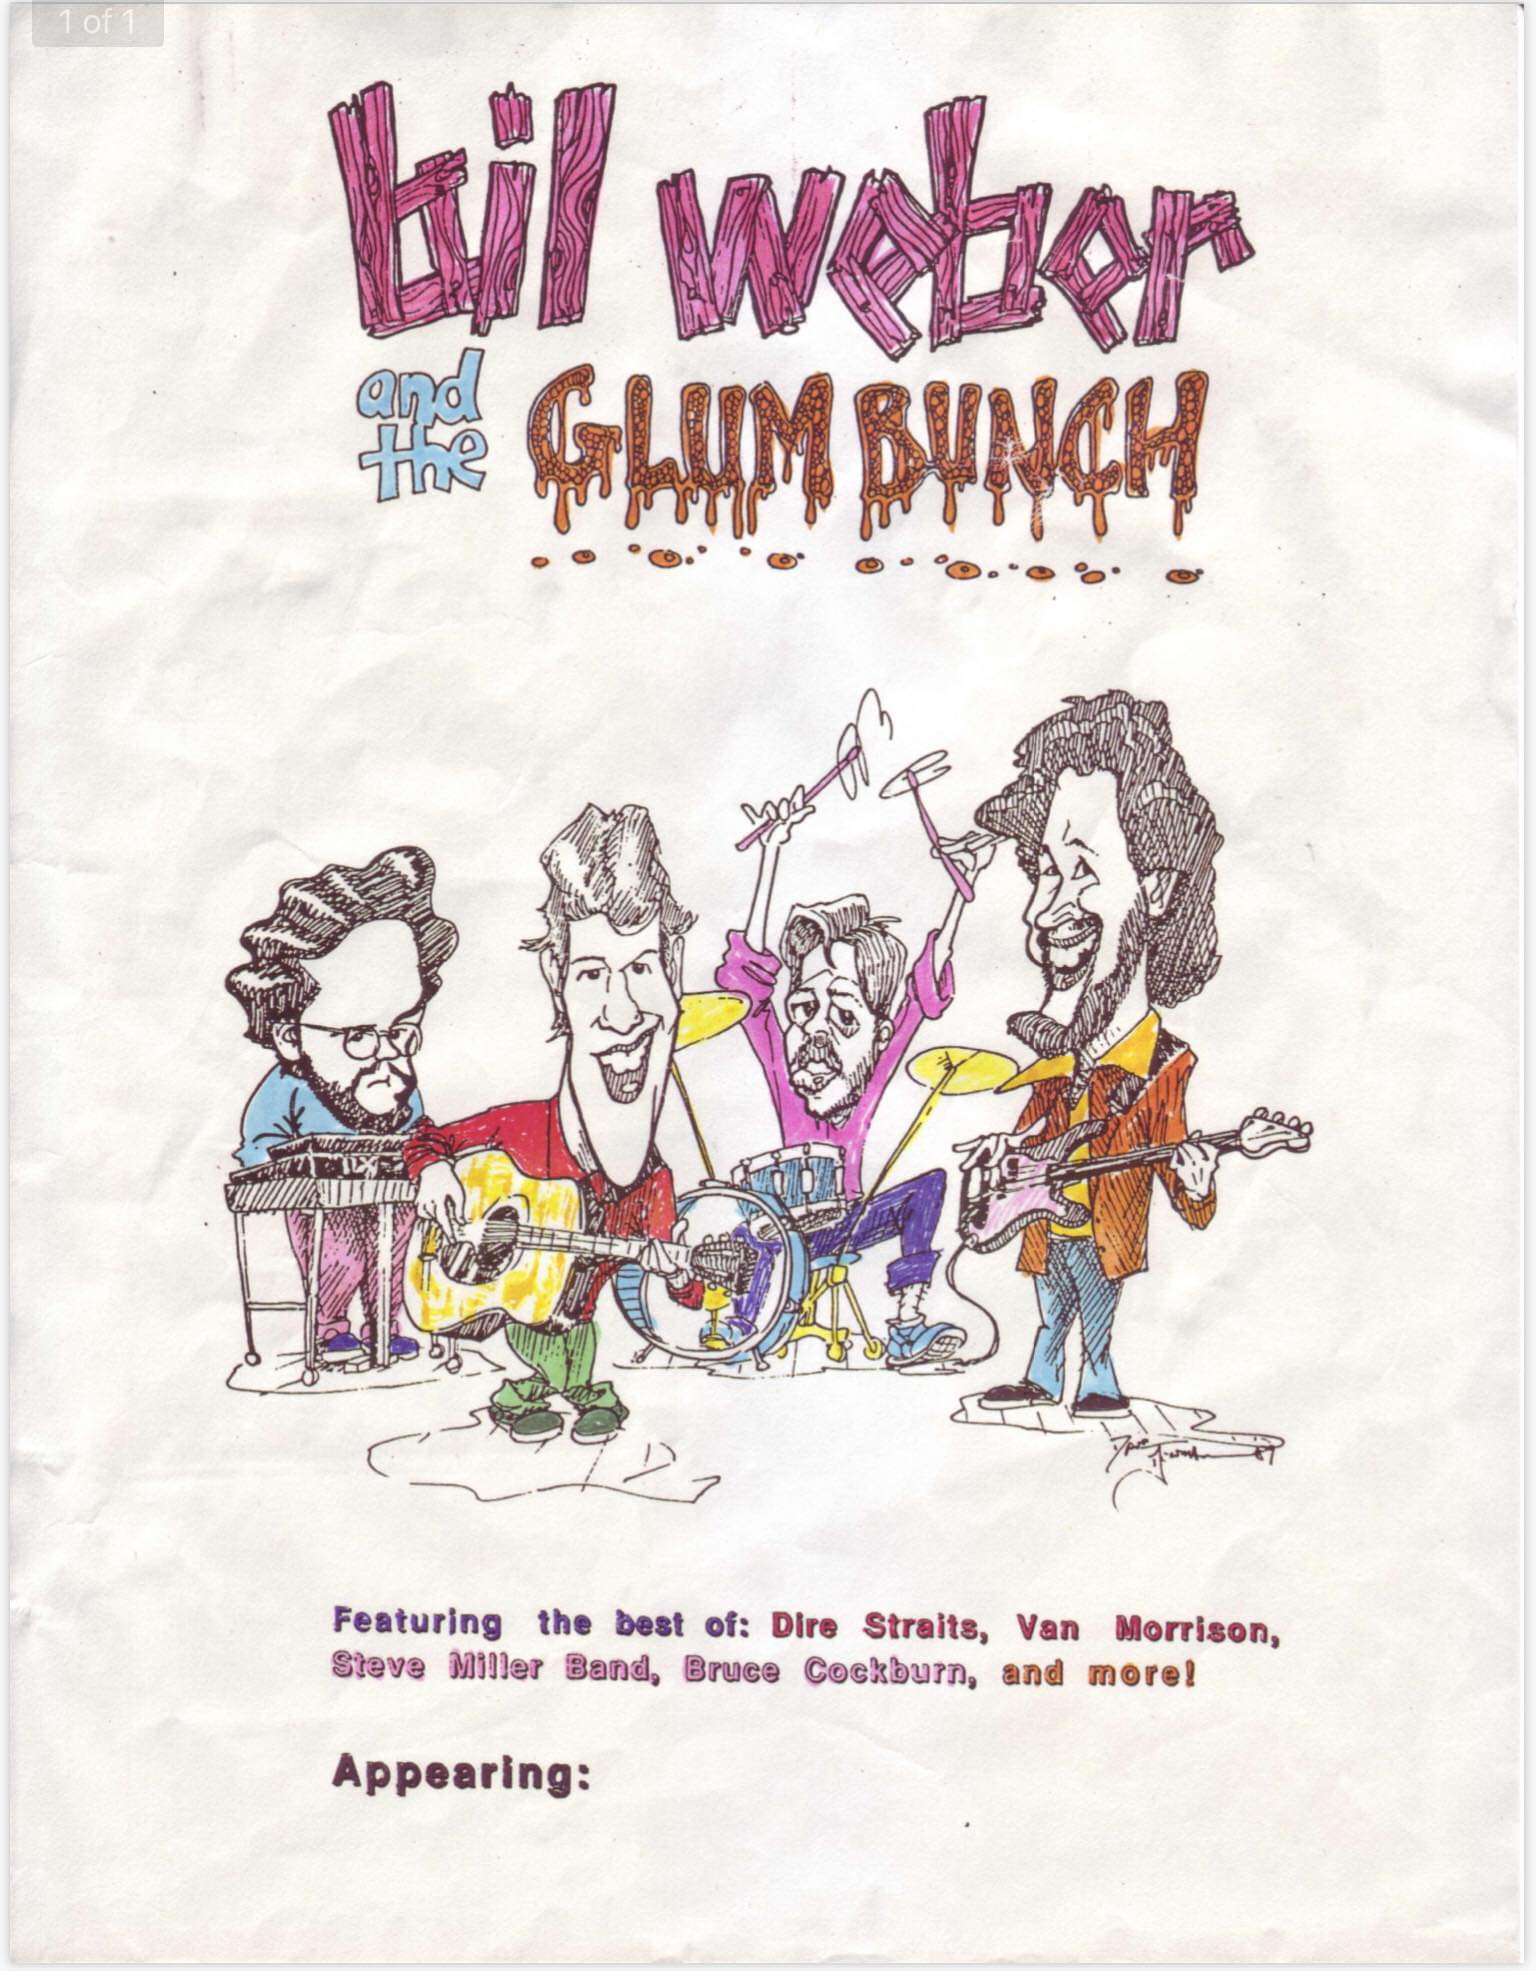 Old Poster for the band Bil Weber and the Glum bunch 